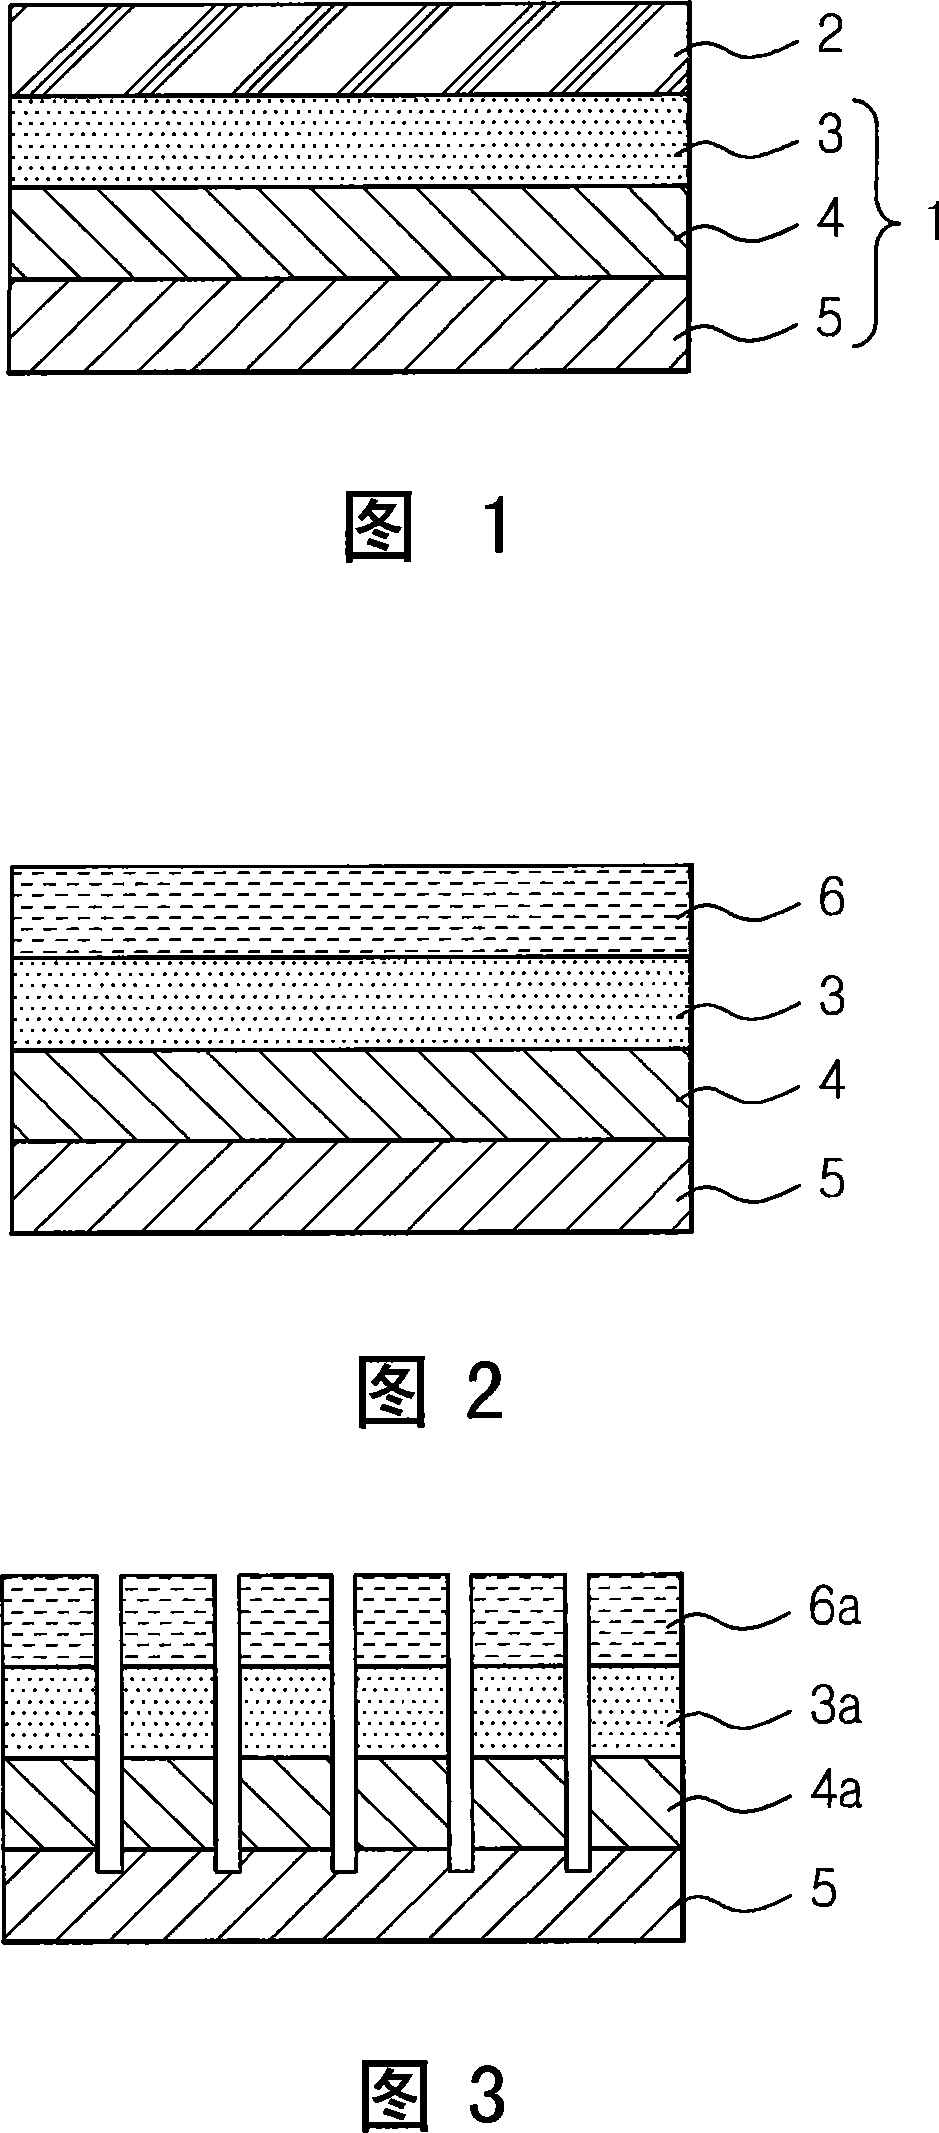 Composition for pressure sensitive adhesive film, pressure sensitive adhesive film, and dicing die bonding film including the same